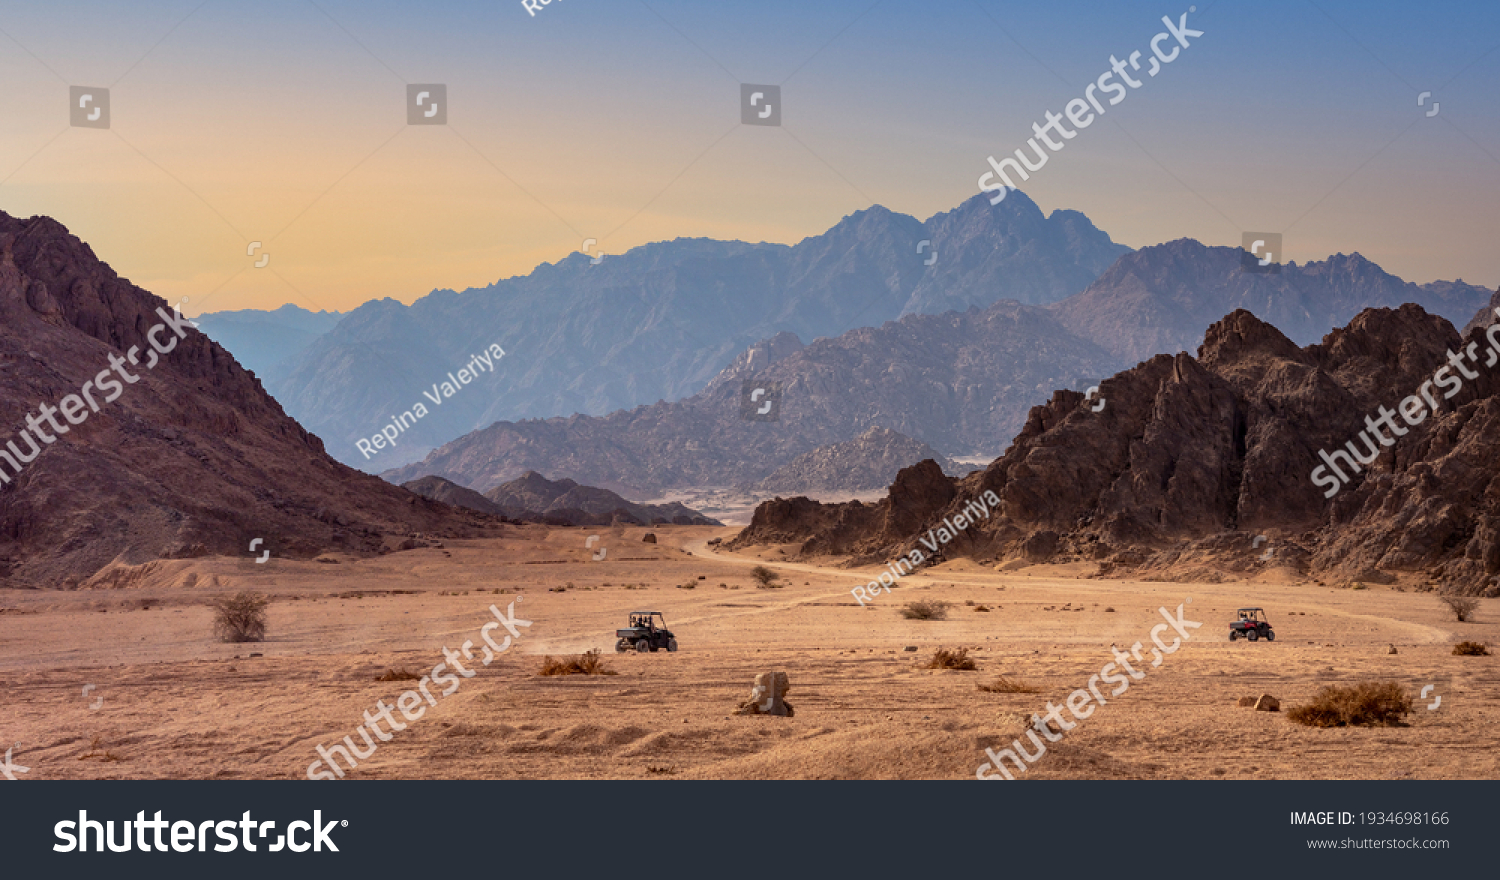 Buggy trip in a stone desert at sunset. Mountain landscape with off-road vehicles driving on a dust dirt road. Active leisure for tourists in Sharm el-Sheikh resorts, Egypt. #1934698166